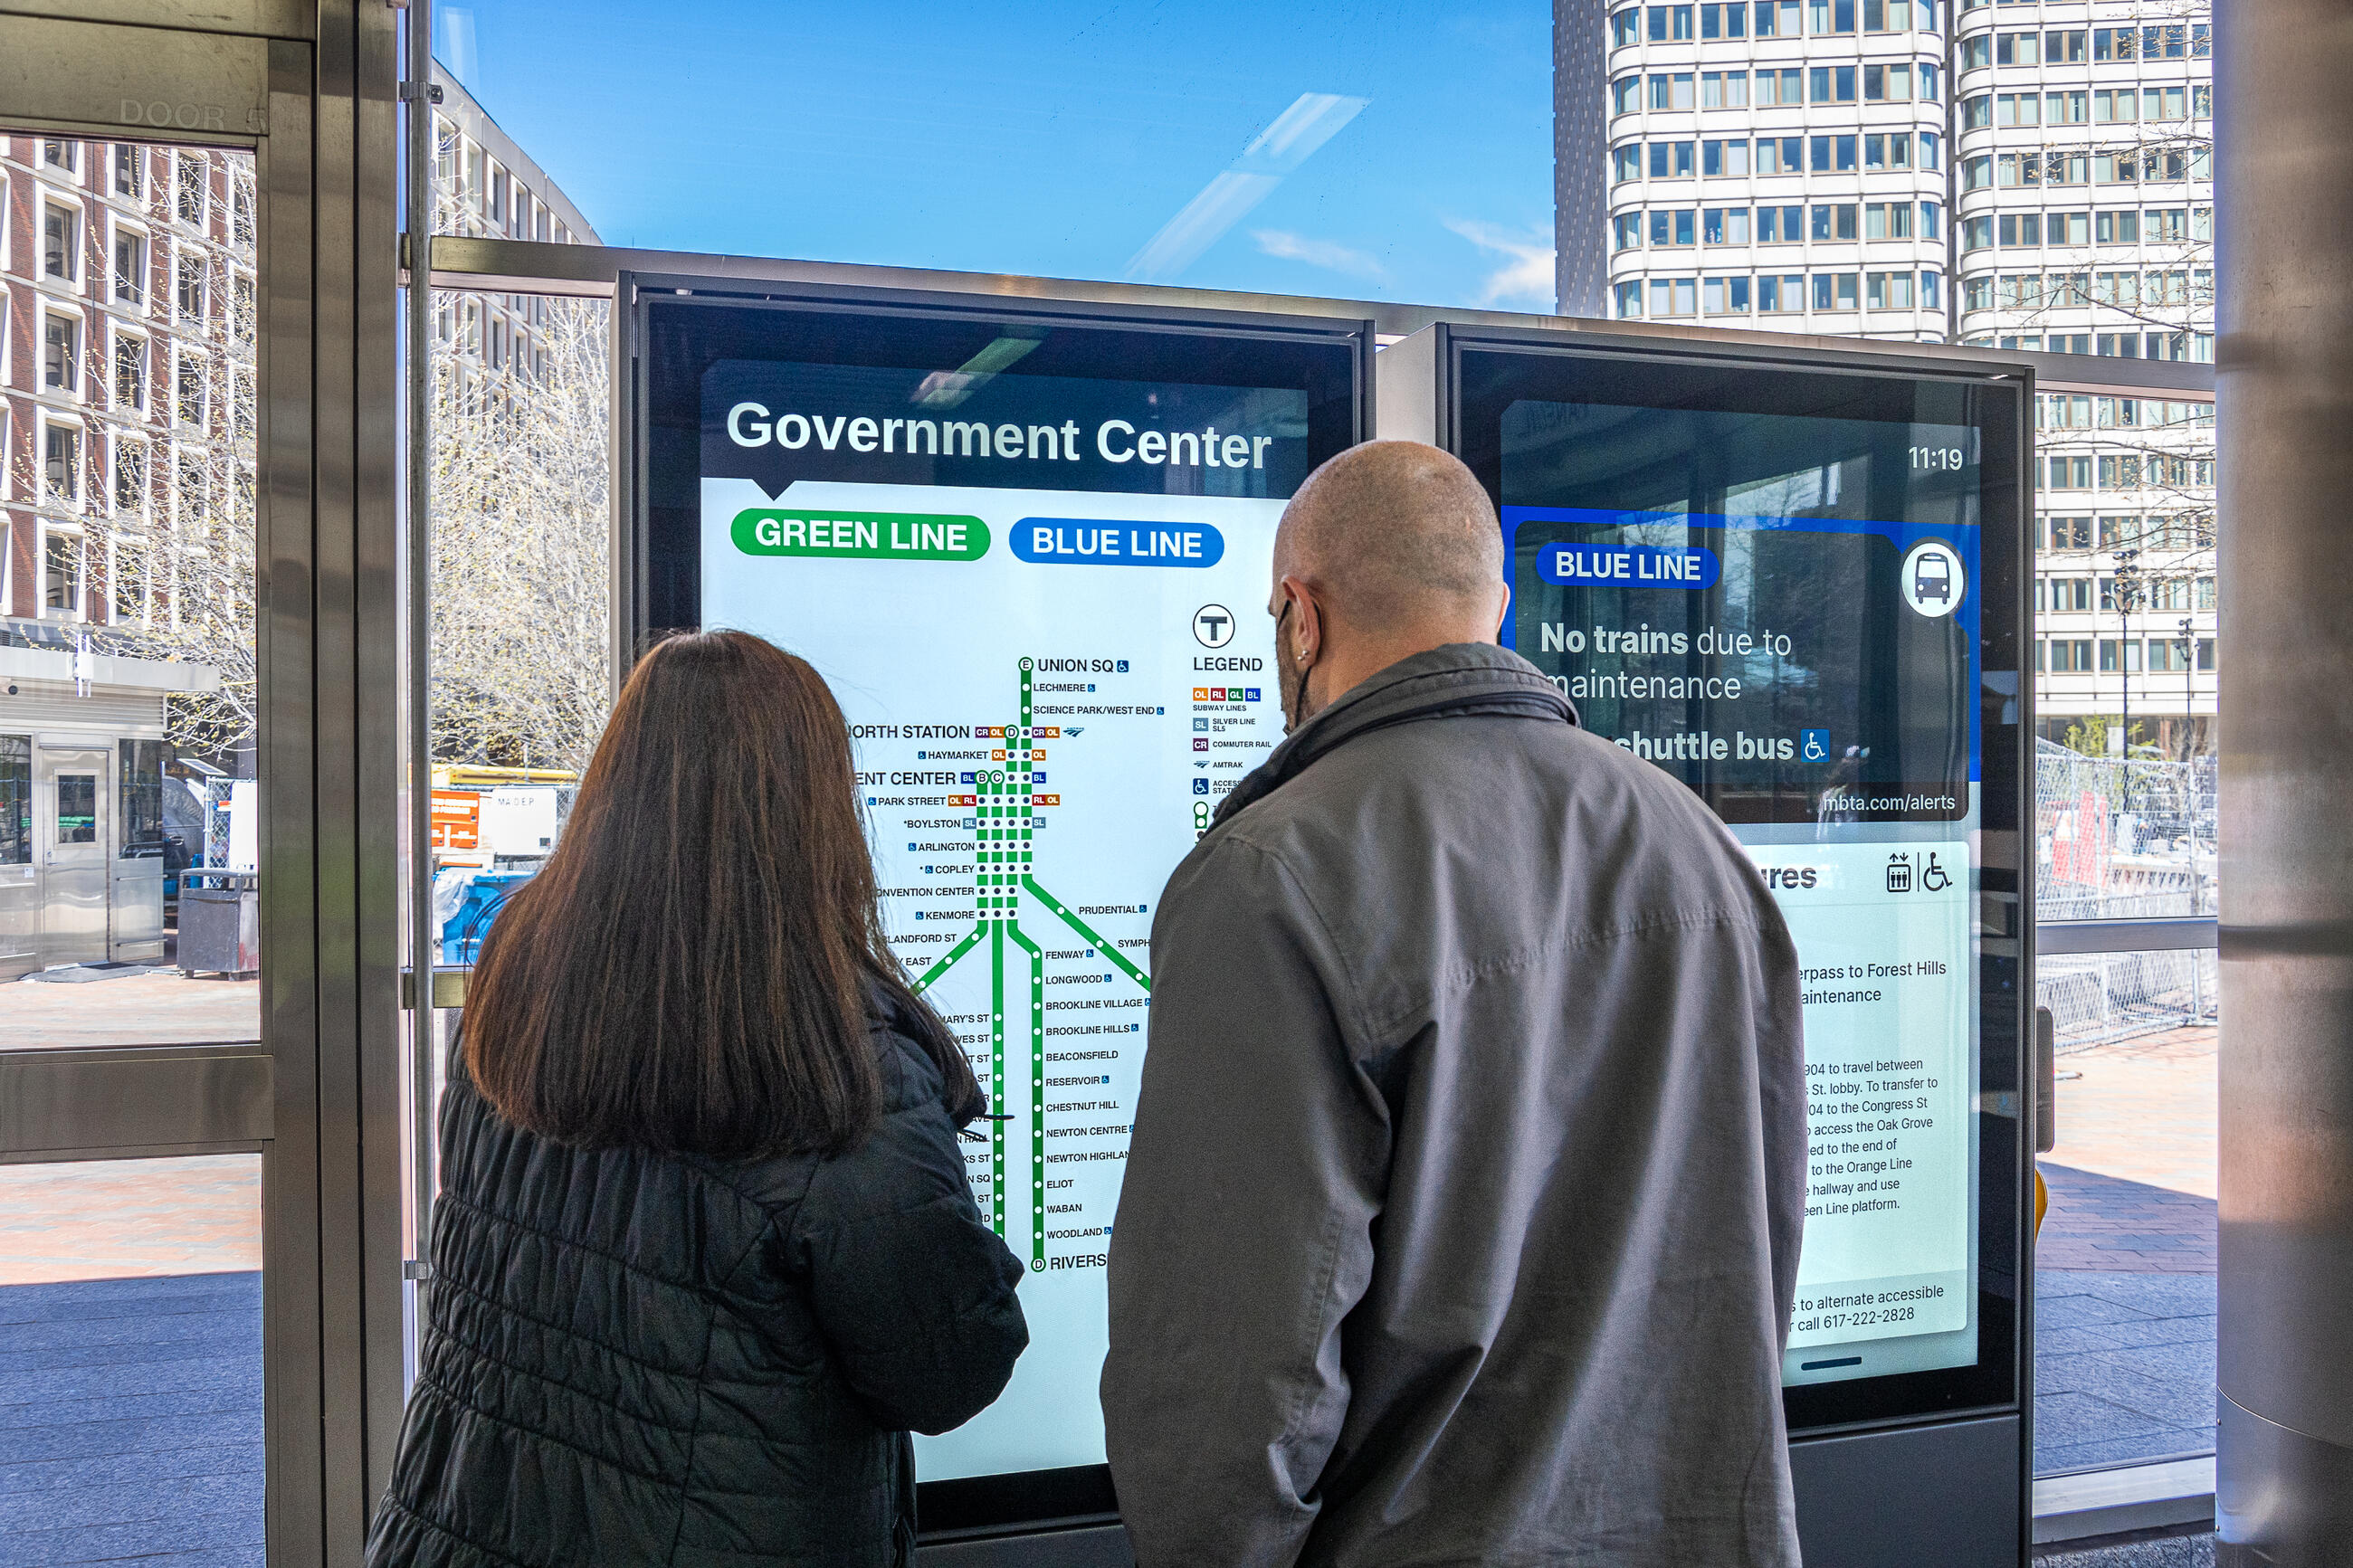 Two riders at Government Center face a two-screen digital sign. At left is a screen showing the Green Line map with a large button that allows users to switch to a Blue Line map. At right is a screen that shows a Blue Line alert saying no trains are running and that shuttles are running instead. Below that is a second alert about other Blue Line closures due to maintenance. 